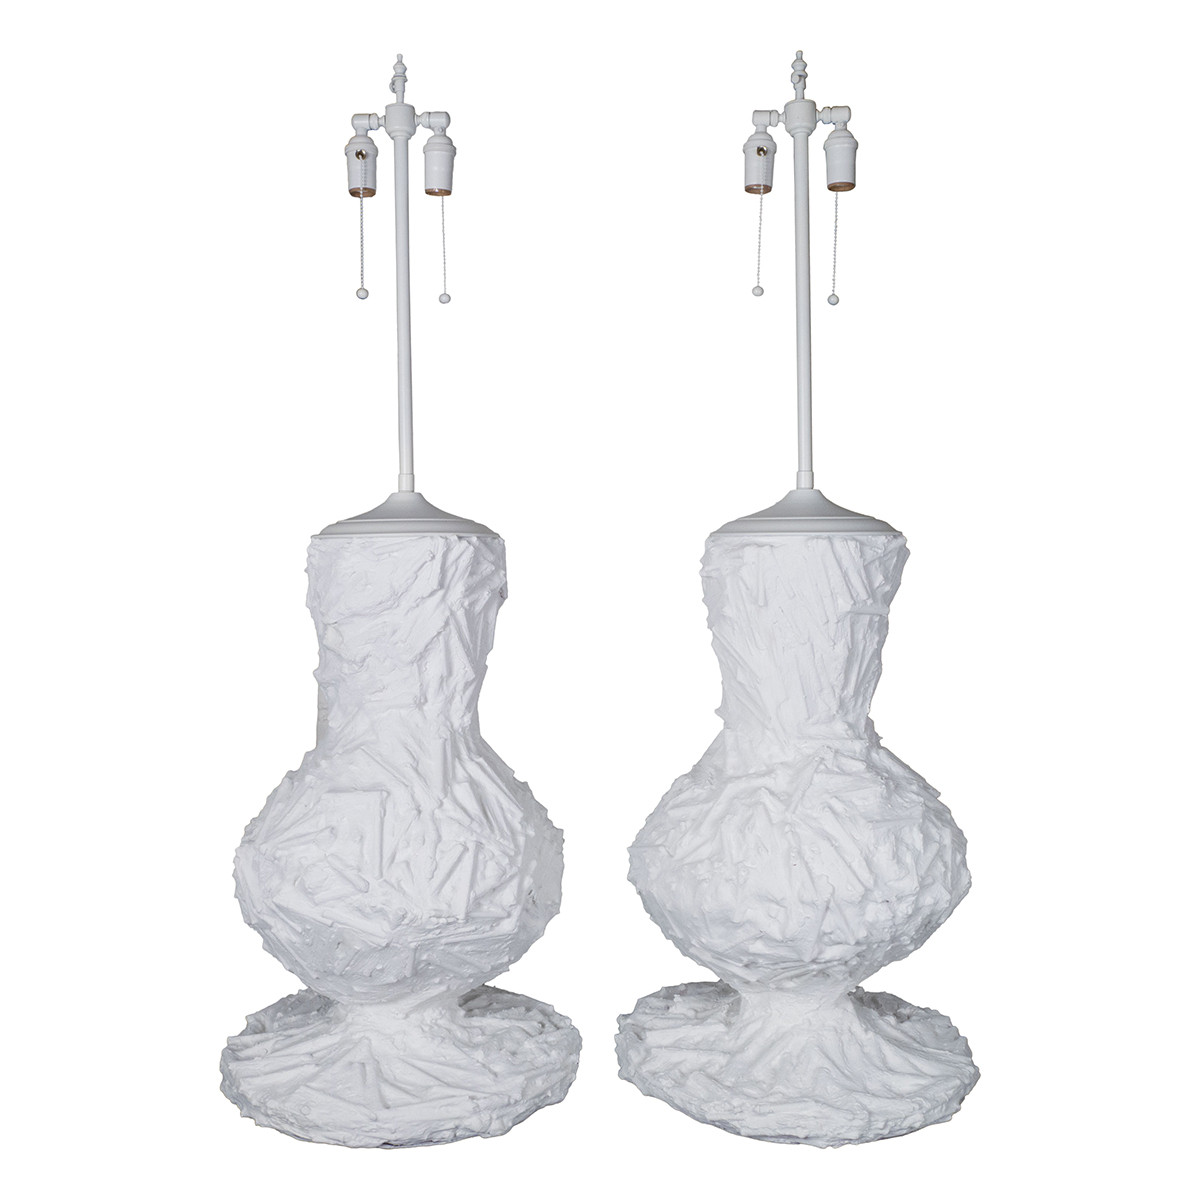 Pair of monumental composition table lamps